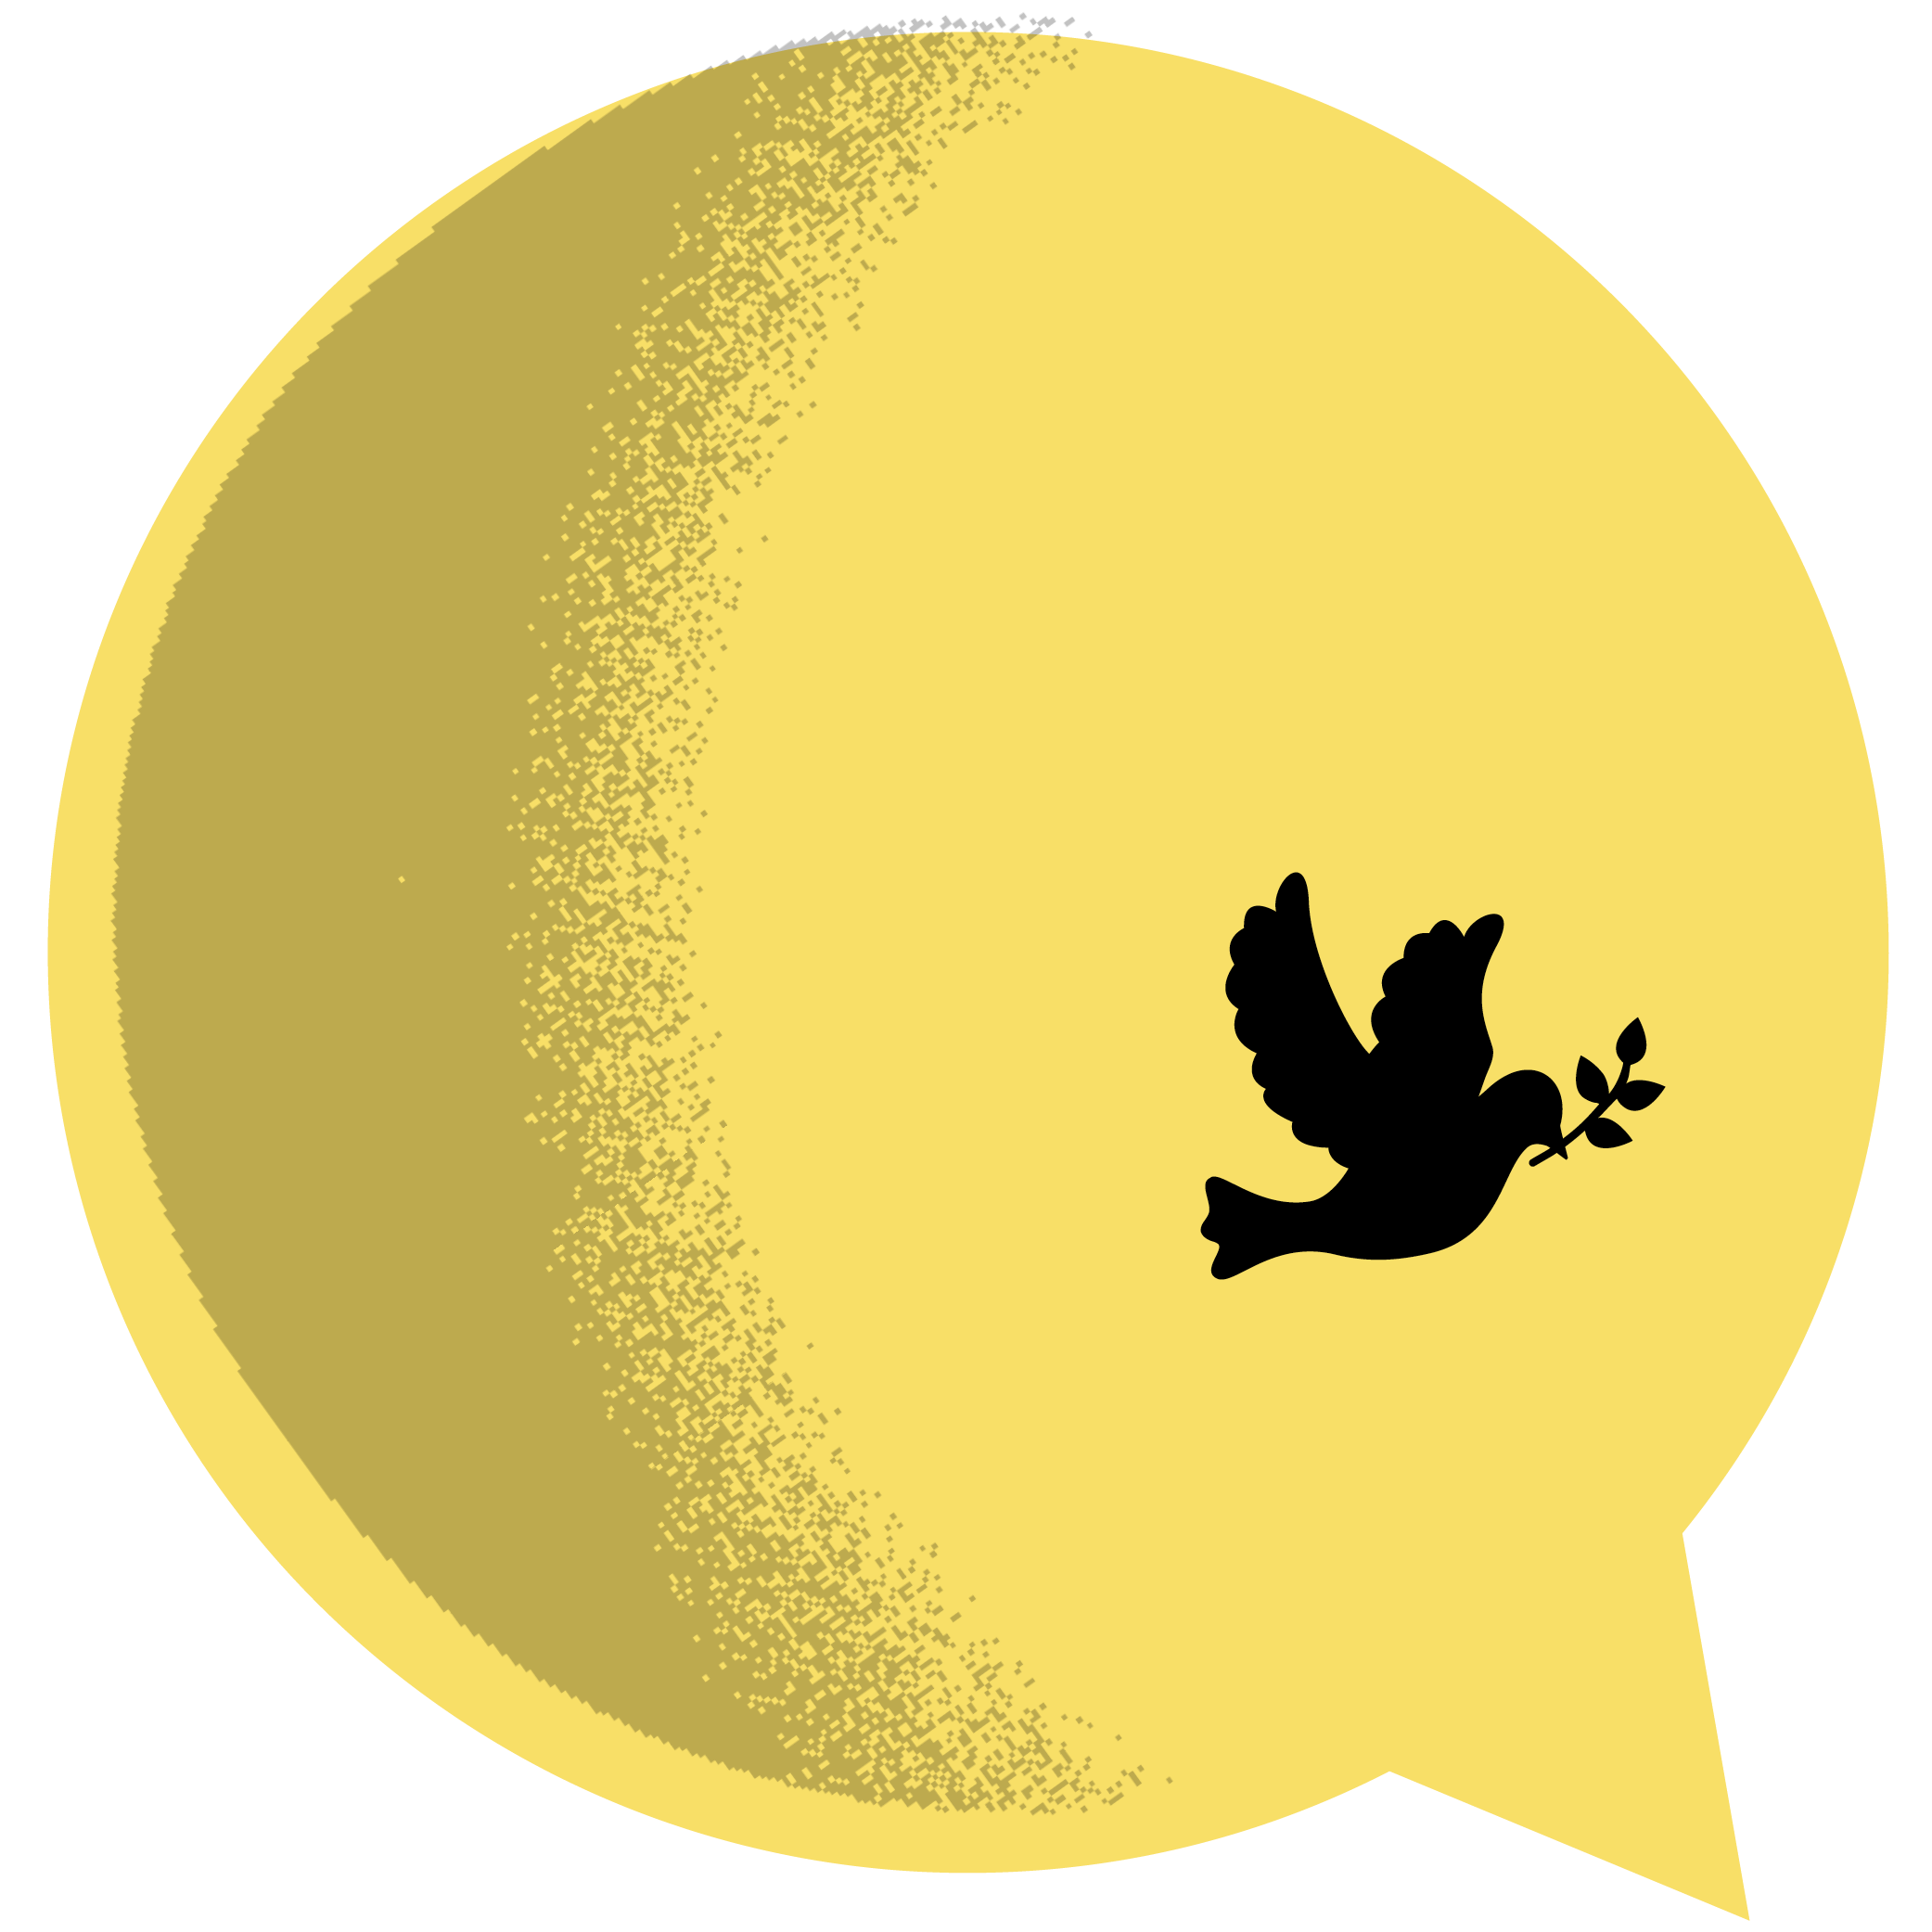 A bird flying over a yellow circle.